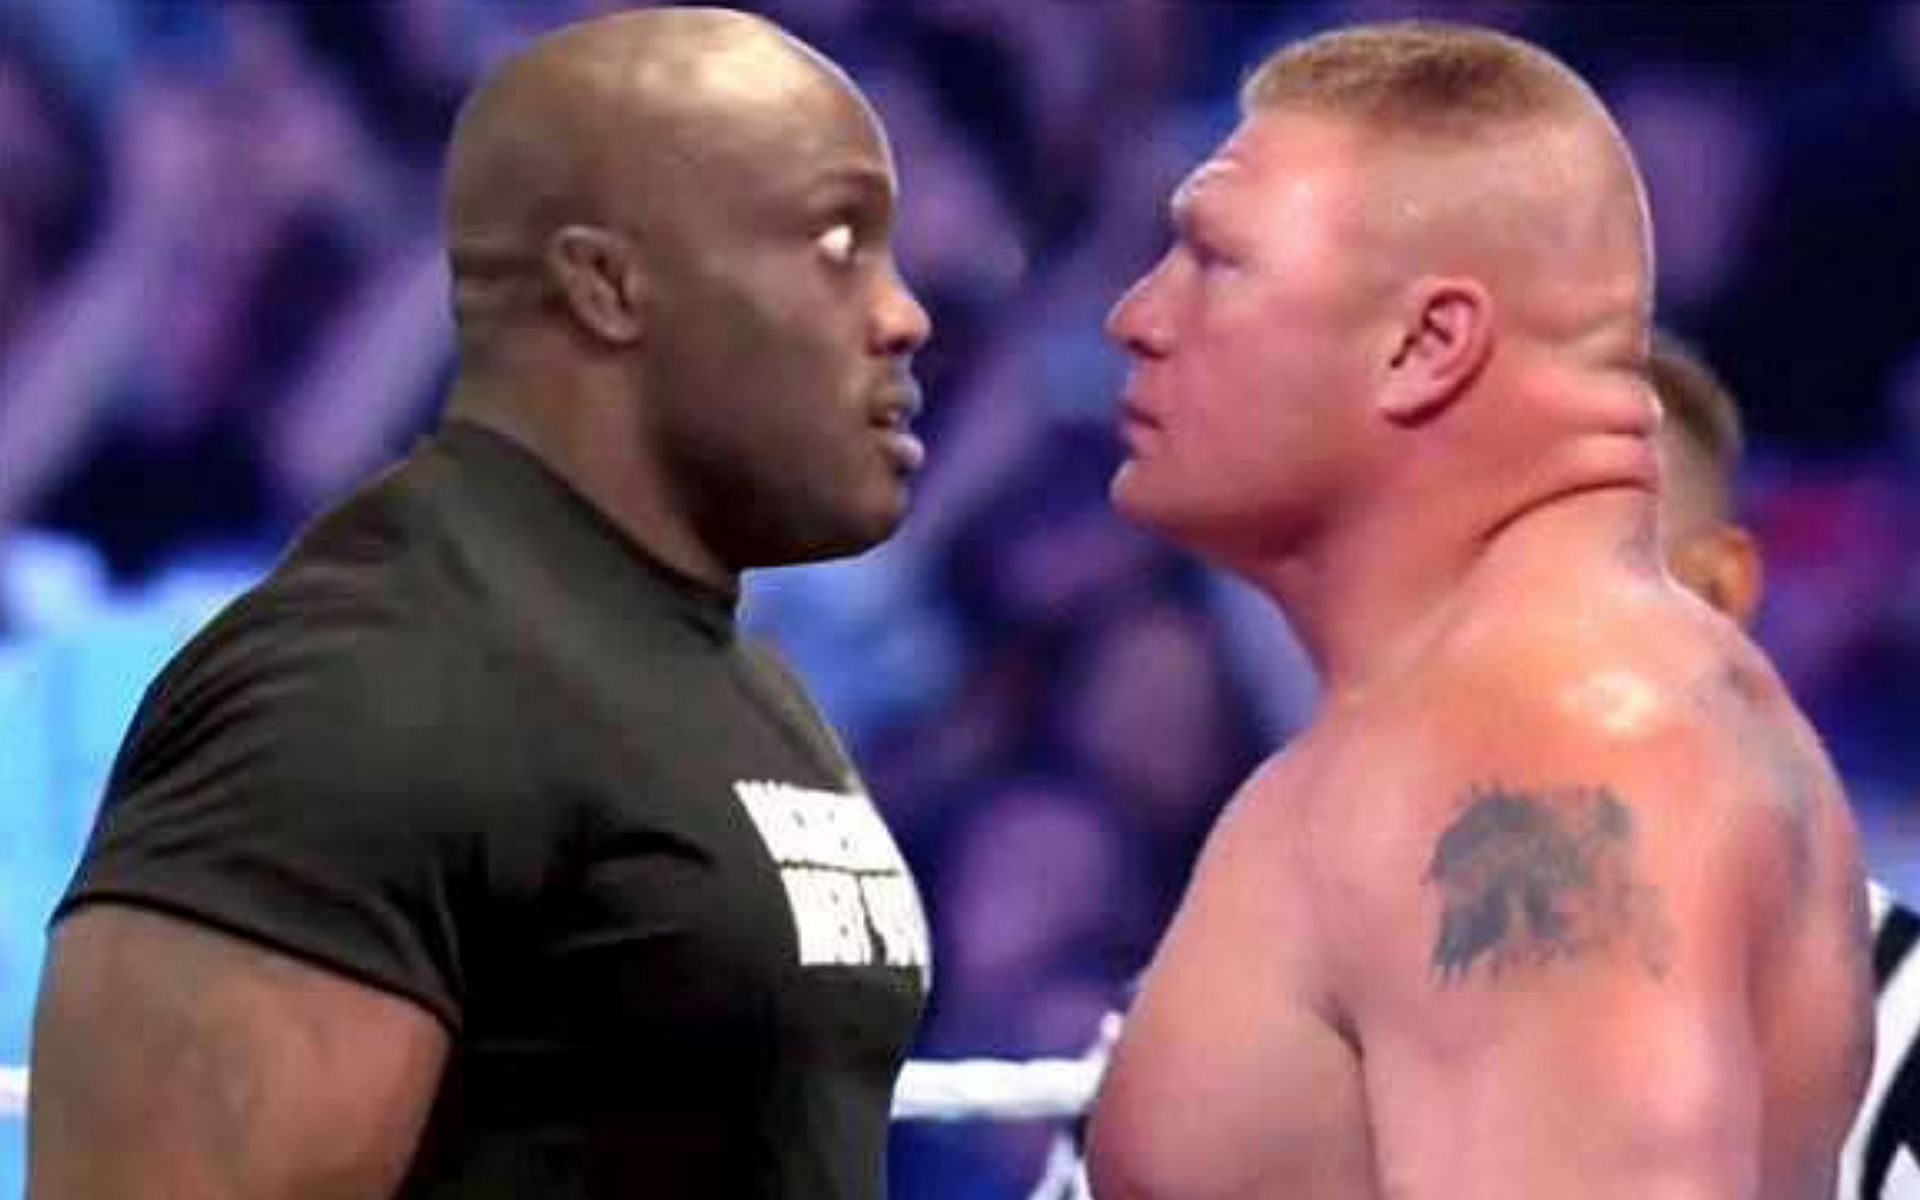 Bobby Lashley (left) and Brock Lesnar (right)